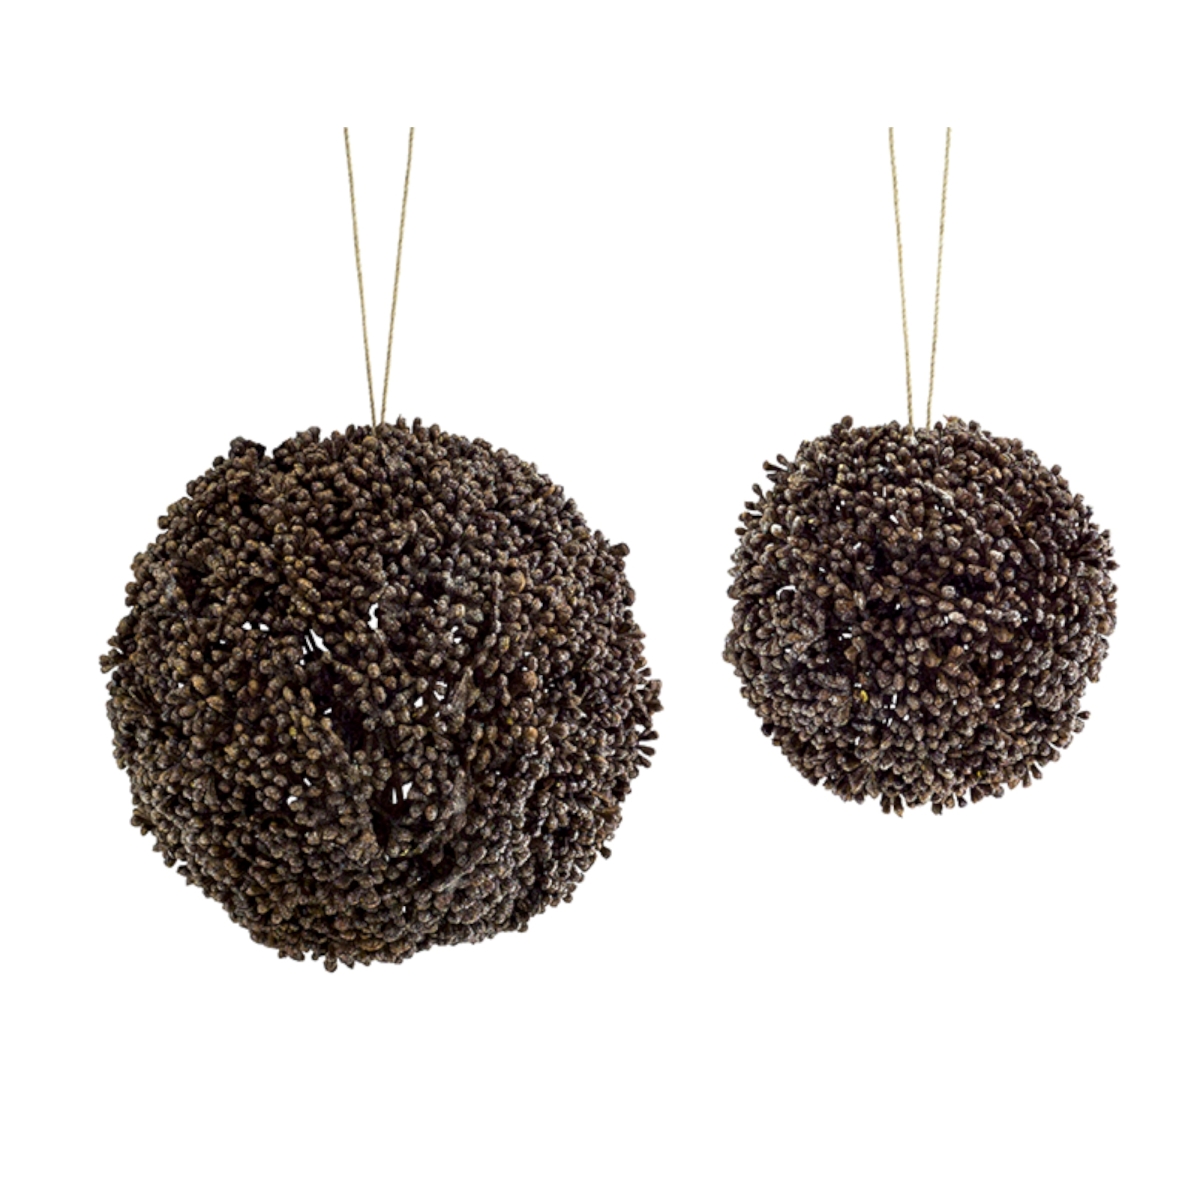 72950ds 5-6.5 In. Plastic Seeded Ornament, Brown - Set Of 8